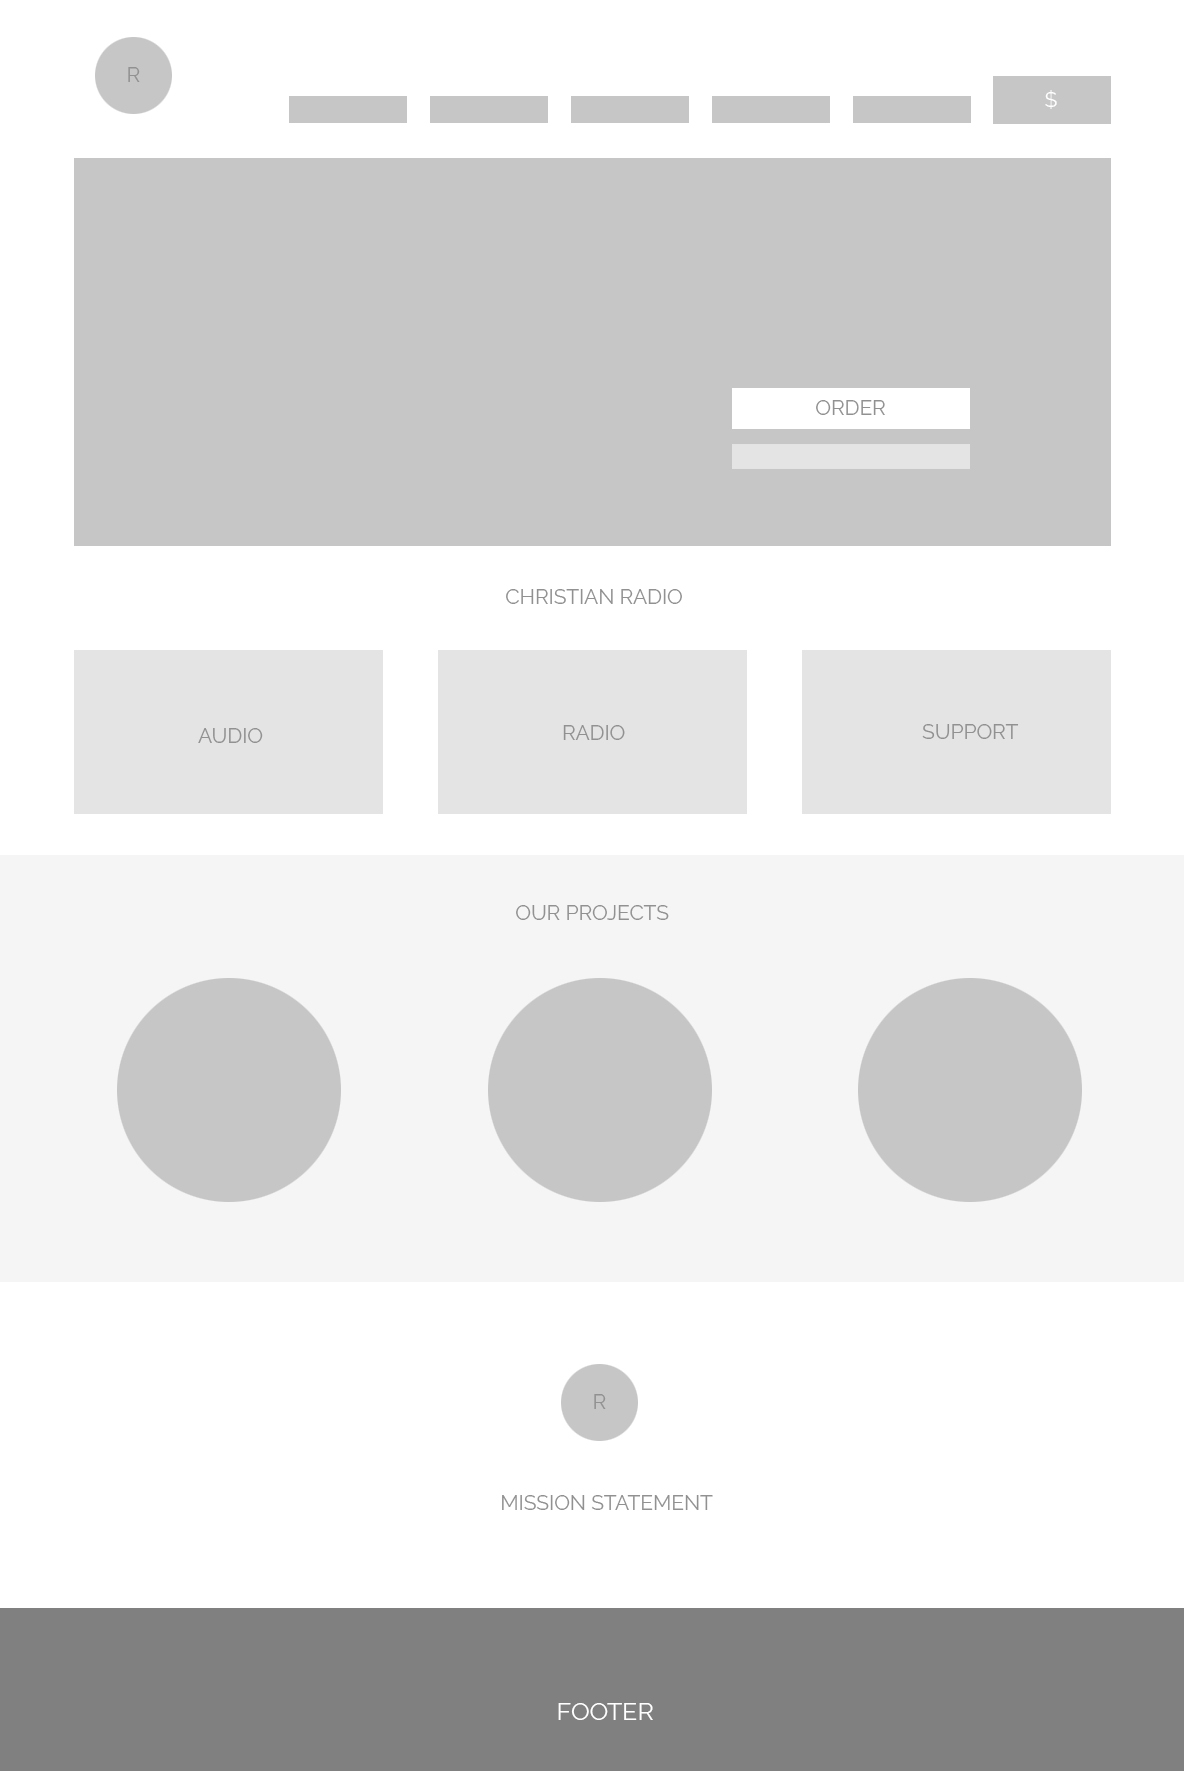 Wireframe of the Home Page